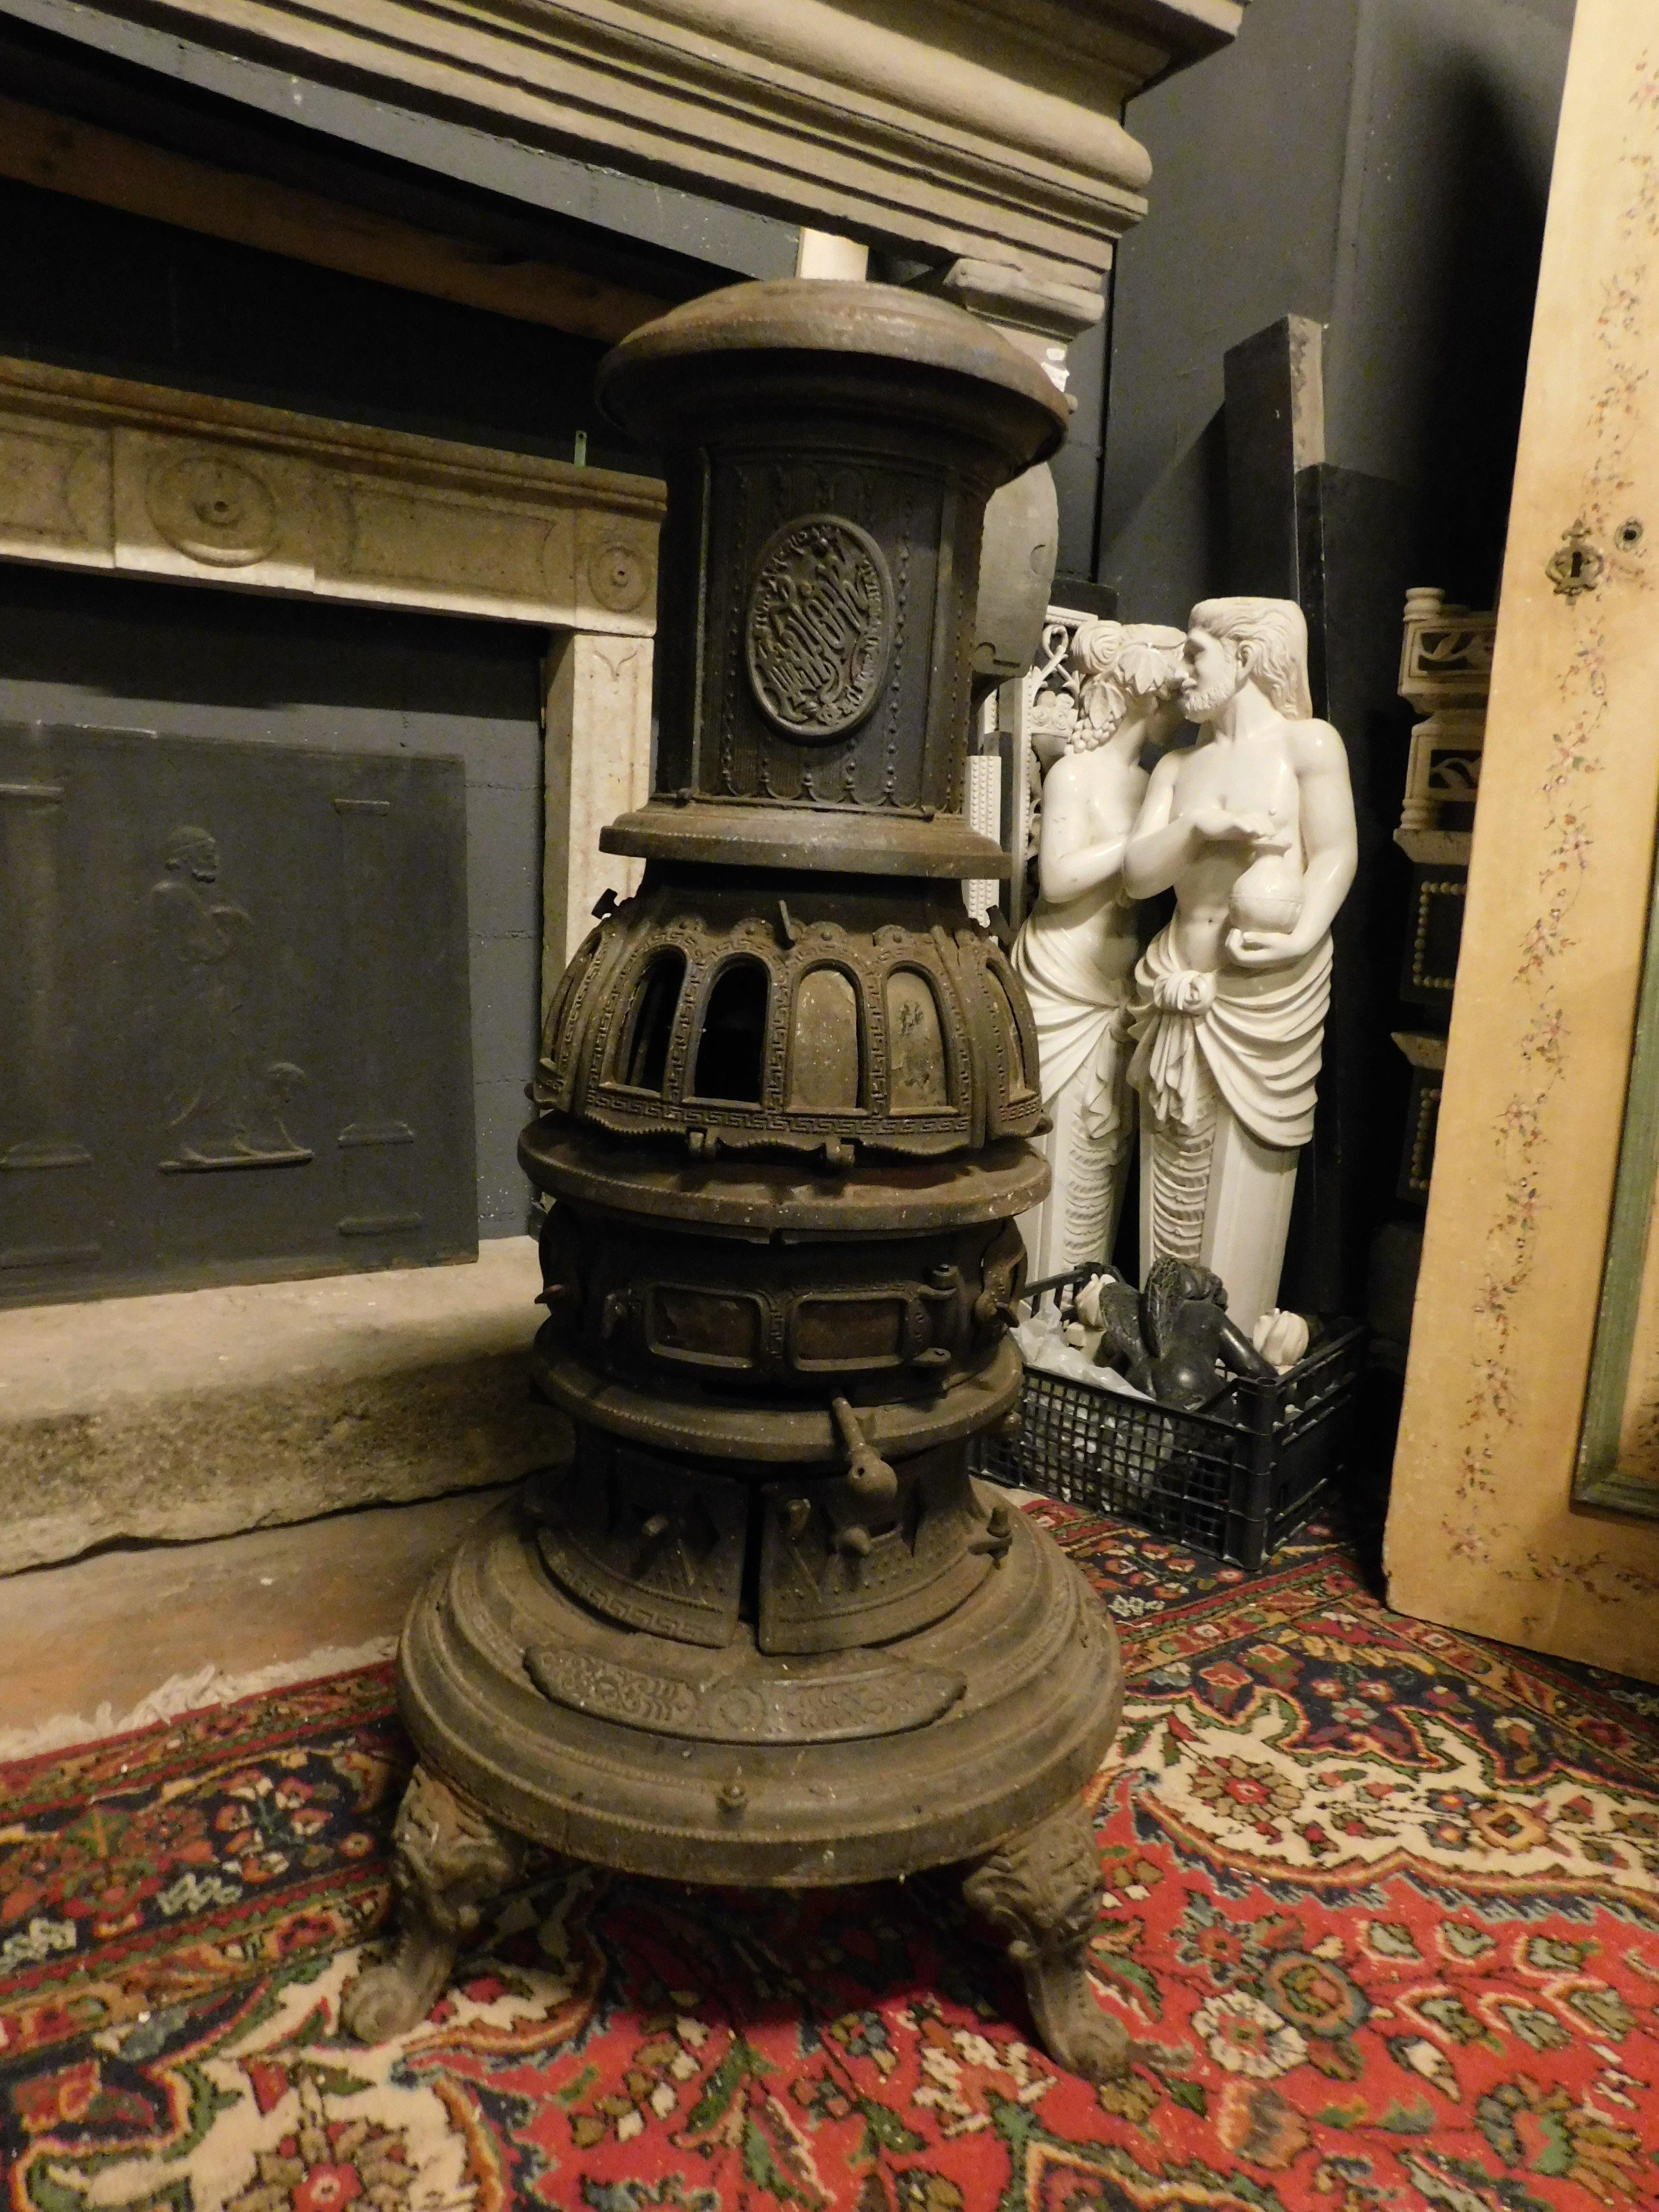 Old wood-burning stove, sculpted in cast iron, American New York model, orduced in Italy in the late 19th century, particular but very fascinating shape, ideal in a rustic or mountain home, some glass is missing as in the photo. maximum measurement